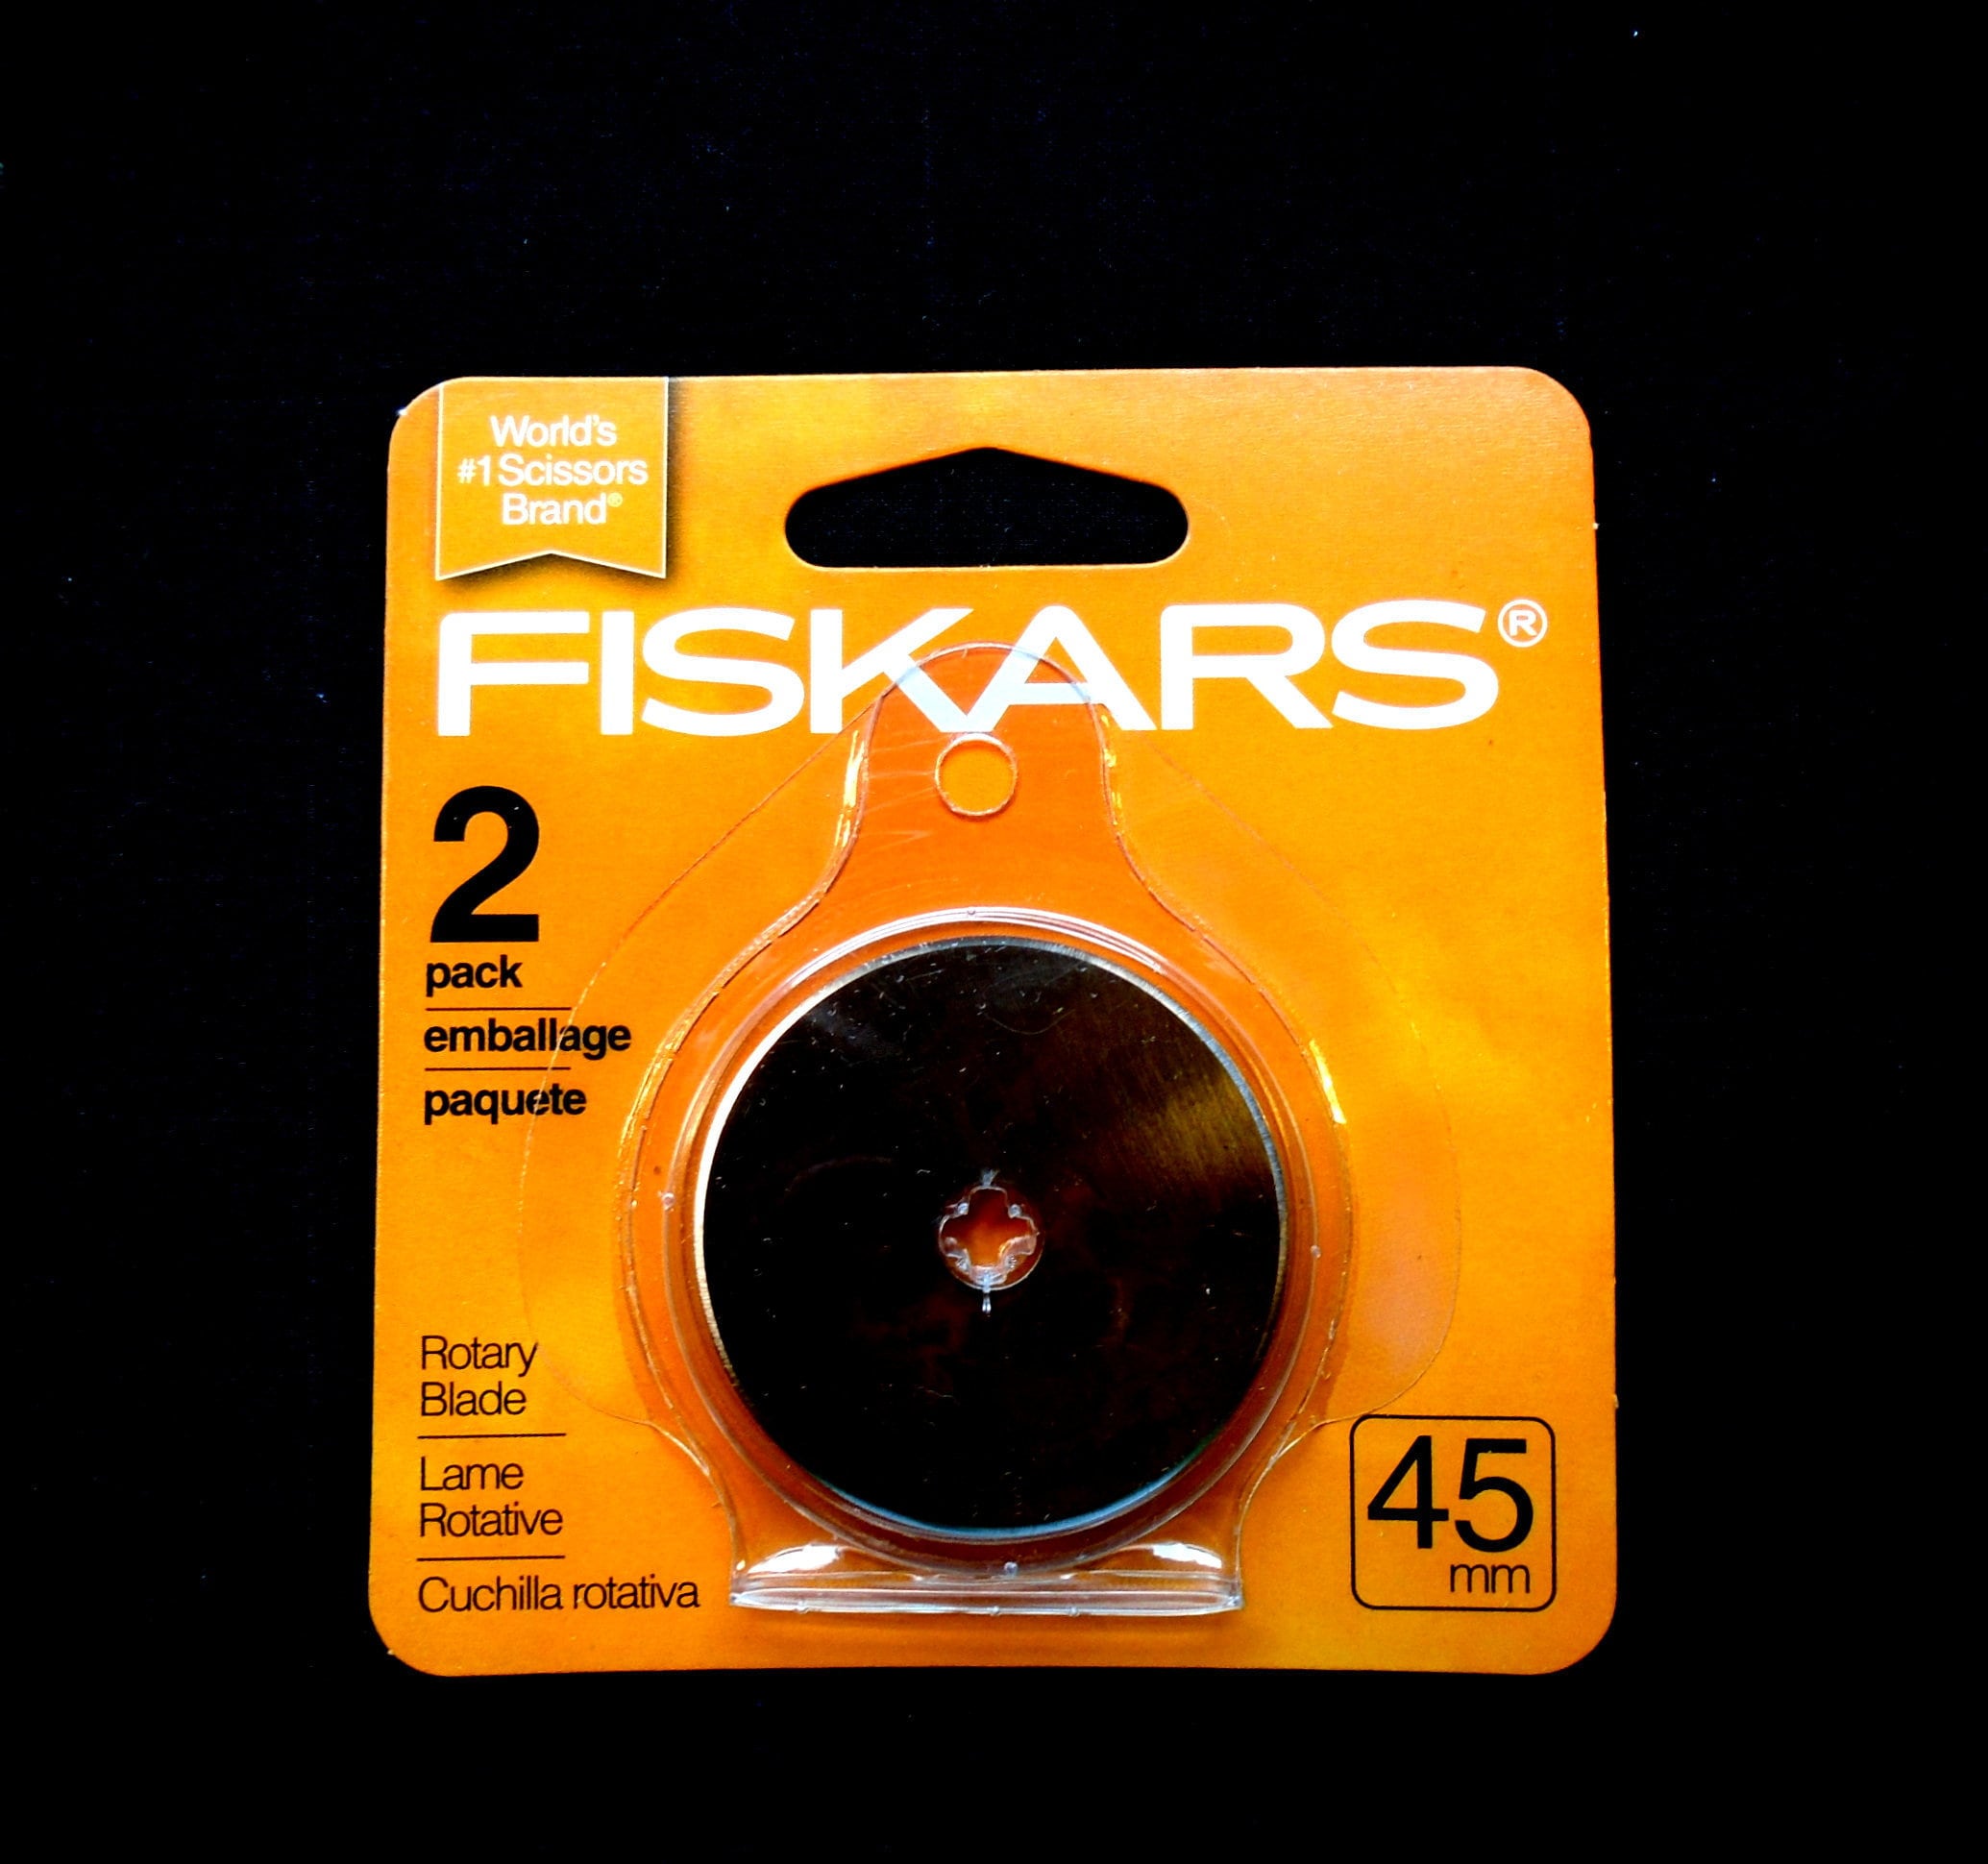  Fiskars Rotary Cutter 45mm Replacement Blades - 5-Pack